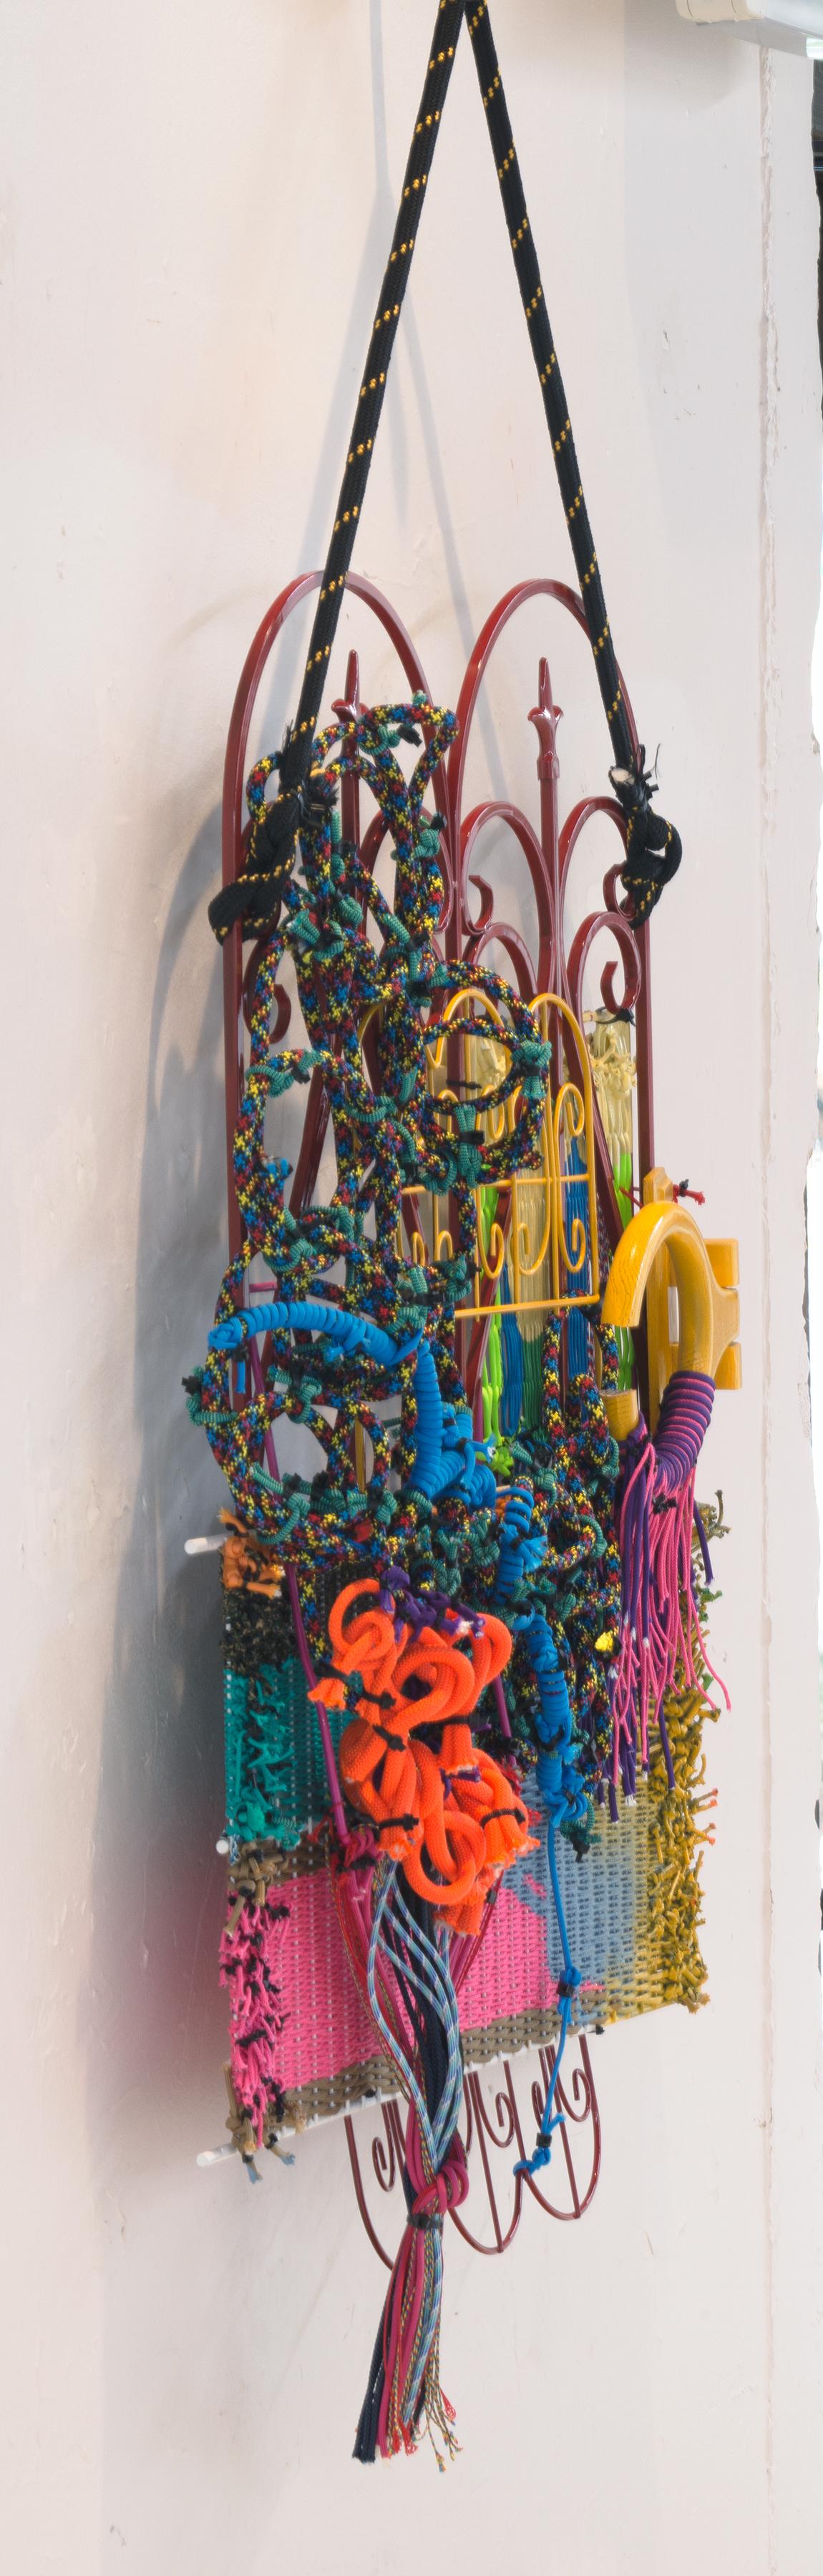 STRUCTURAL POROSITY 02 - Sculptural Wall Hanging w/ Found & Repurposed Objects - Contemporary Sculpture by Liz Miller